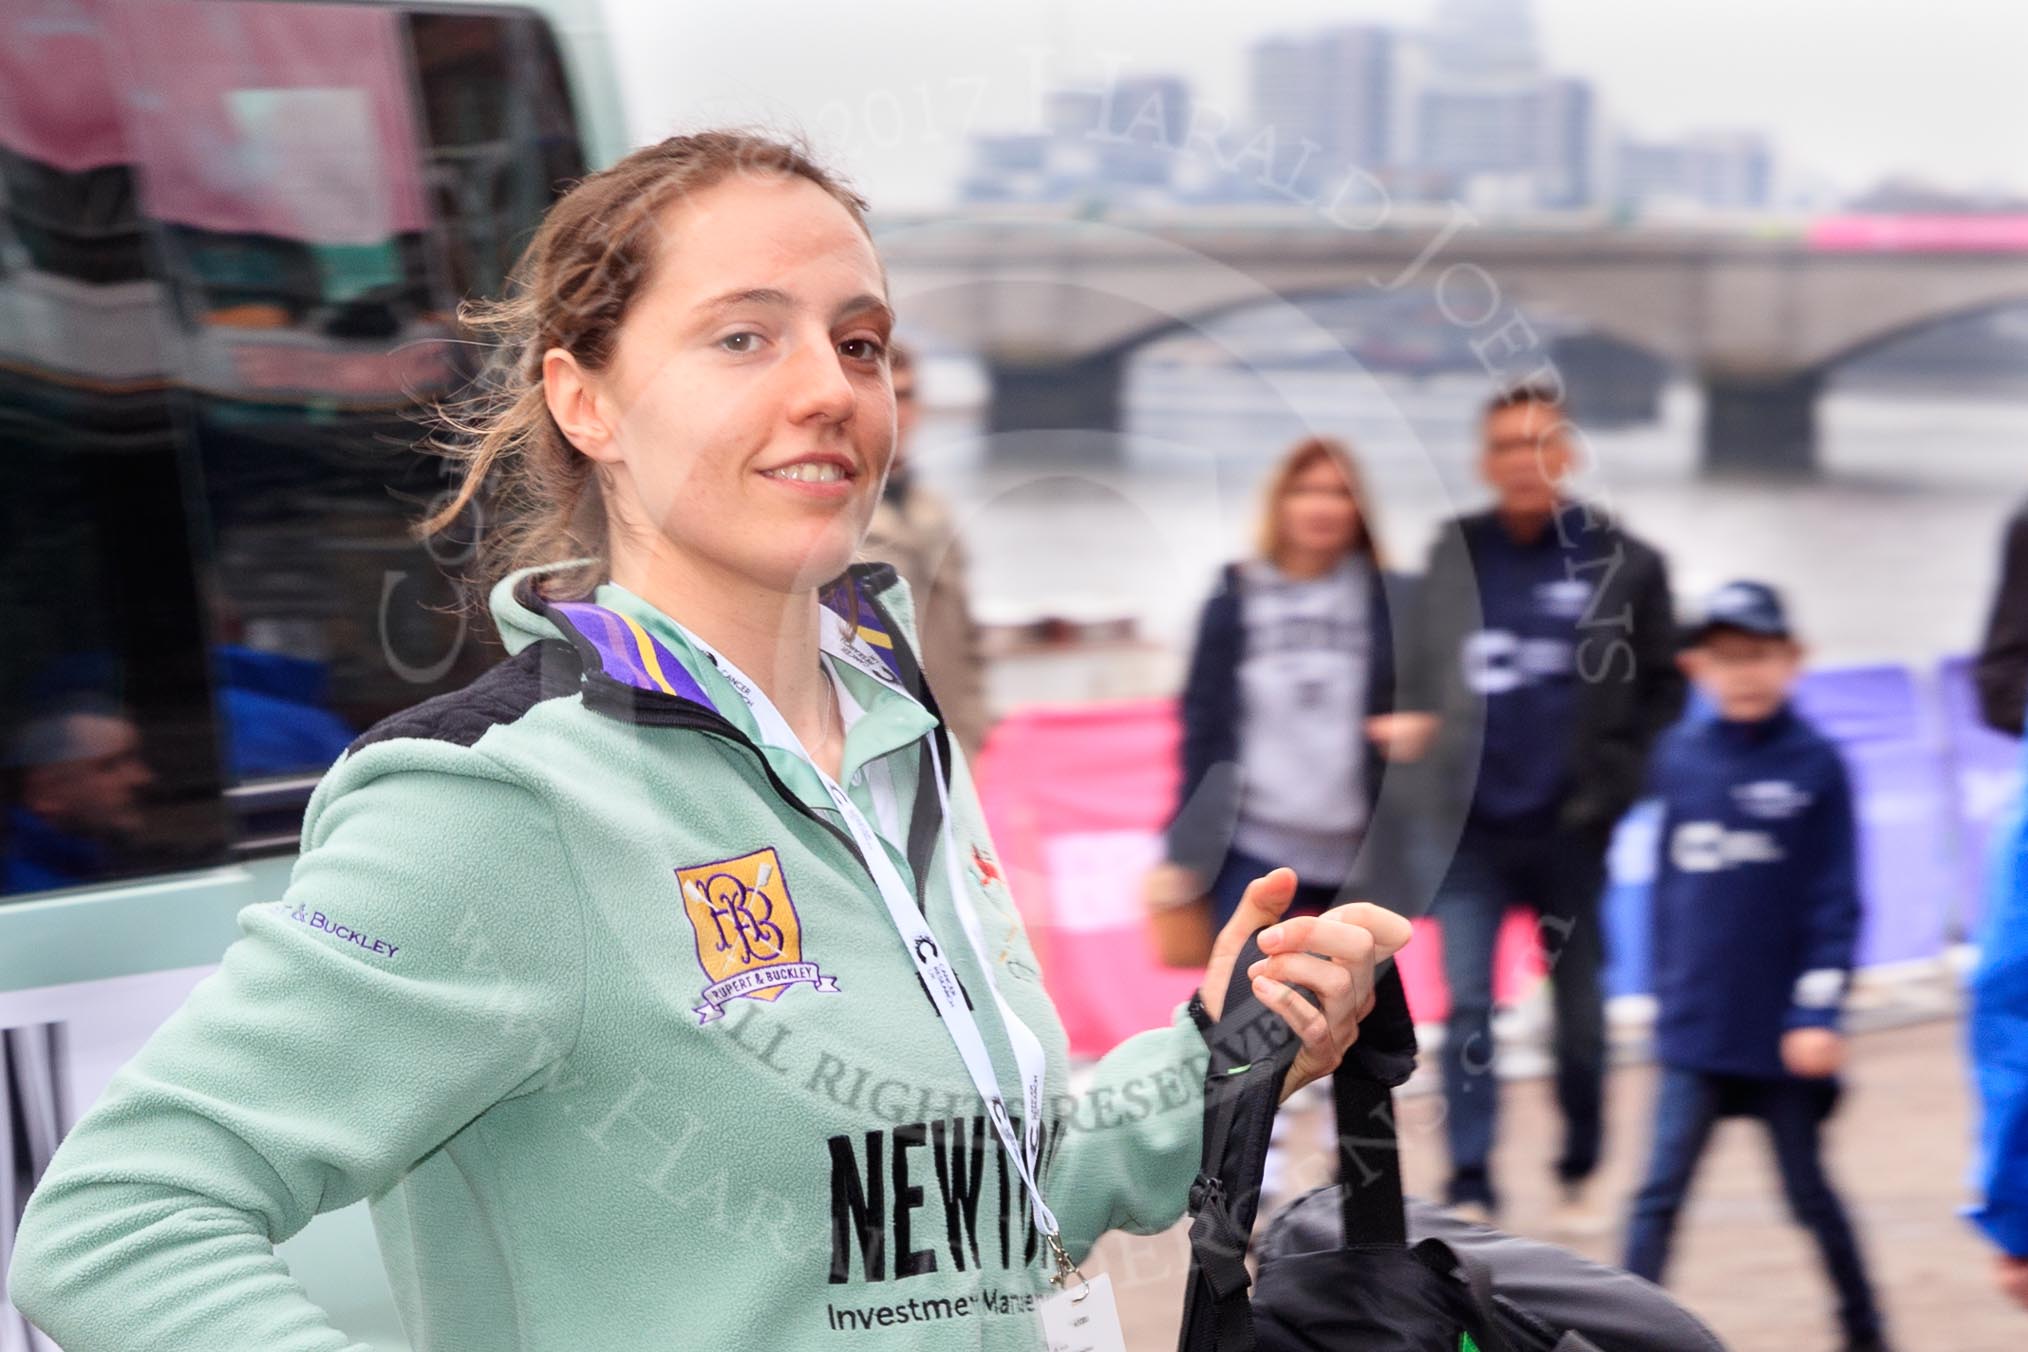 The Cancer Research UK Women's Boat Race 2018: Cambridge 3 seat Kelsy Barolak arriving at the boathouses before the race.
River Thames between Putney Bridge and Mortlake,
London SW15,

United Kingdom,
on 24 March 2018 at 13:55, image #15